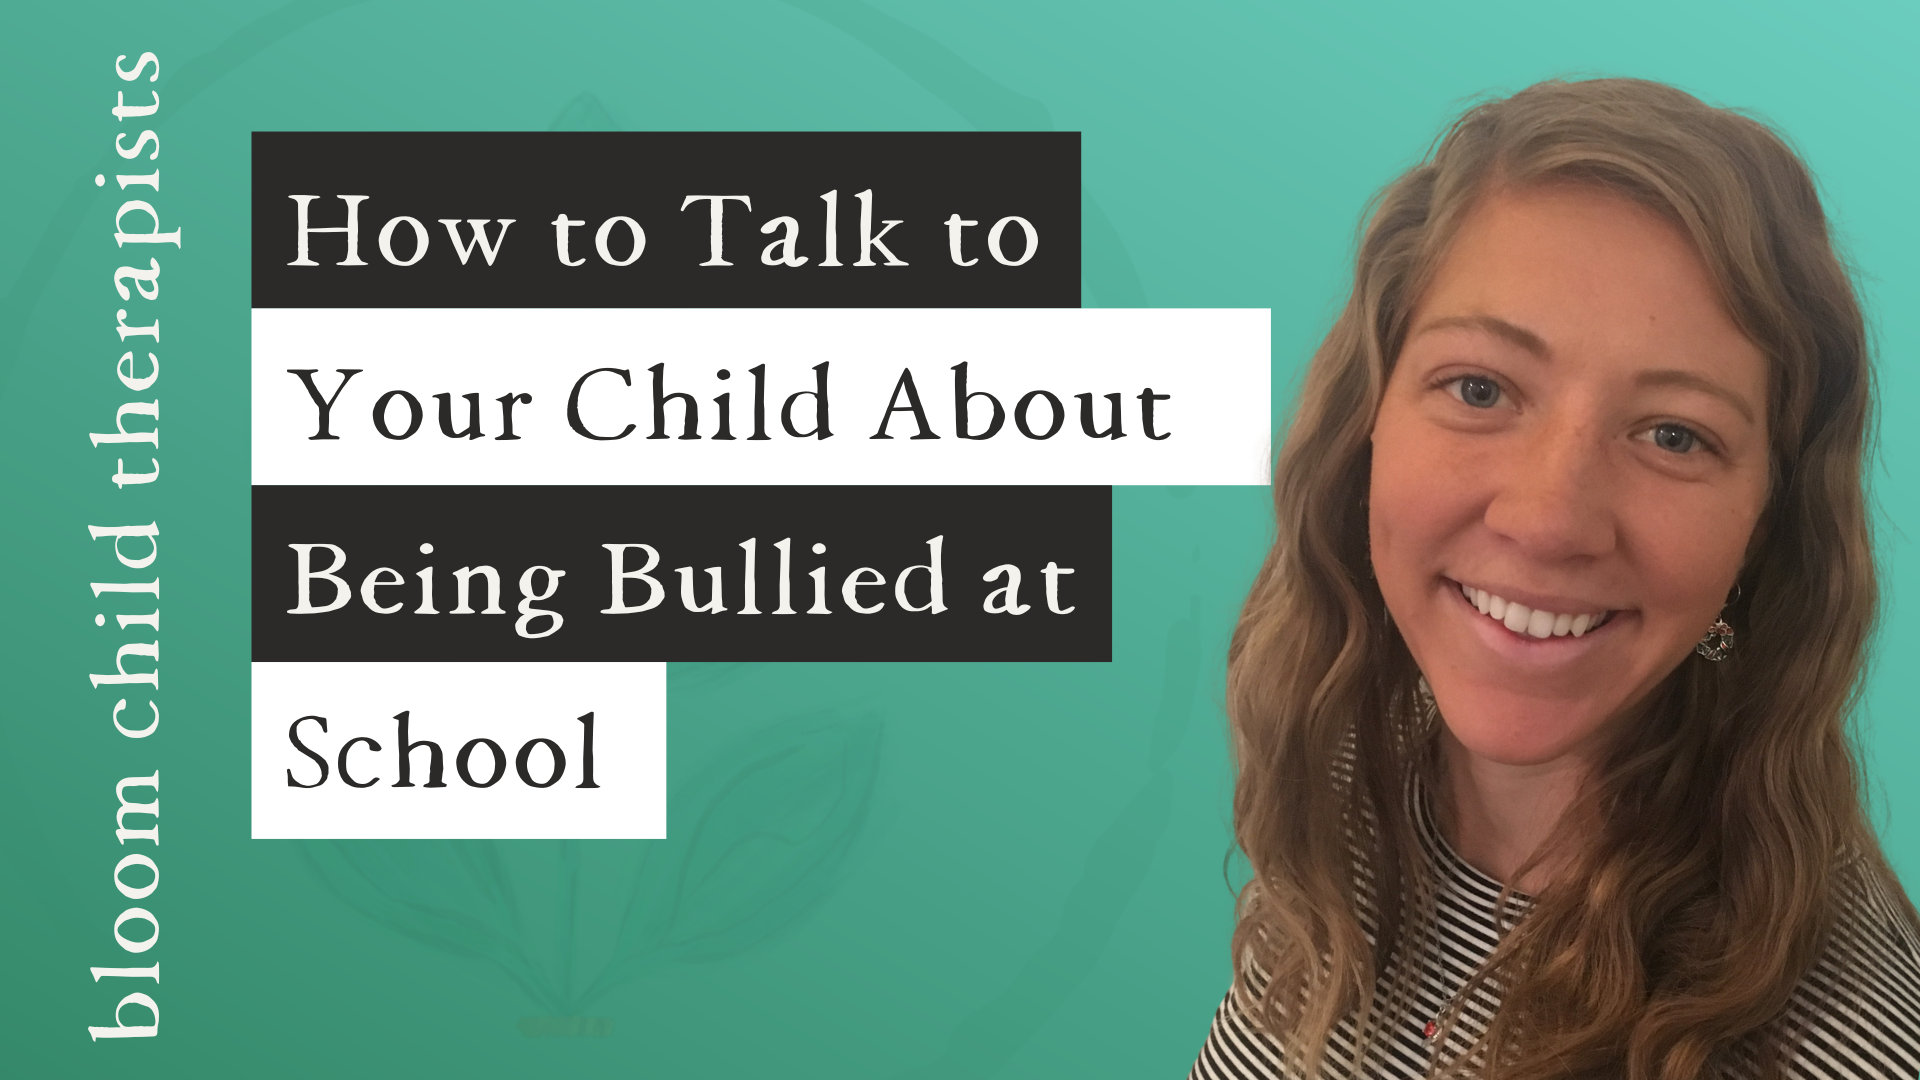 How to Talk to Your Child About Being Bullied at School